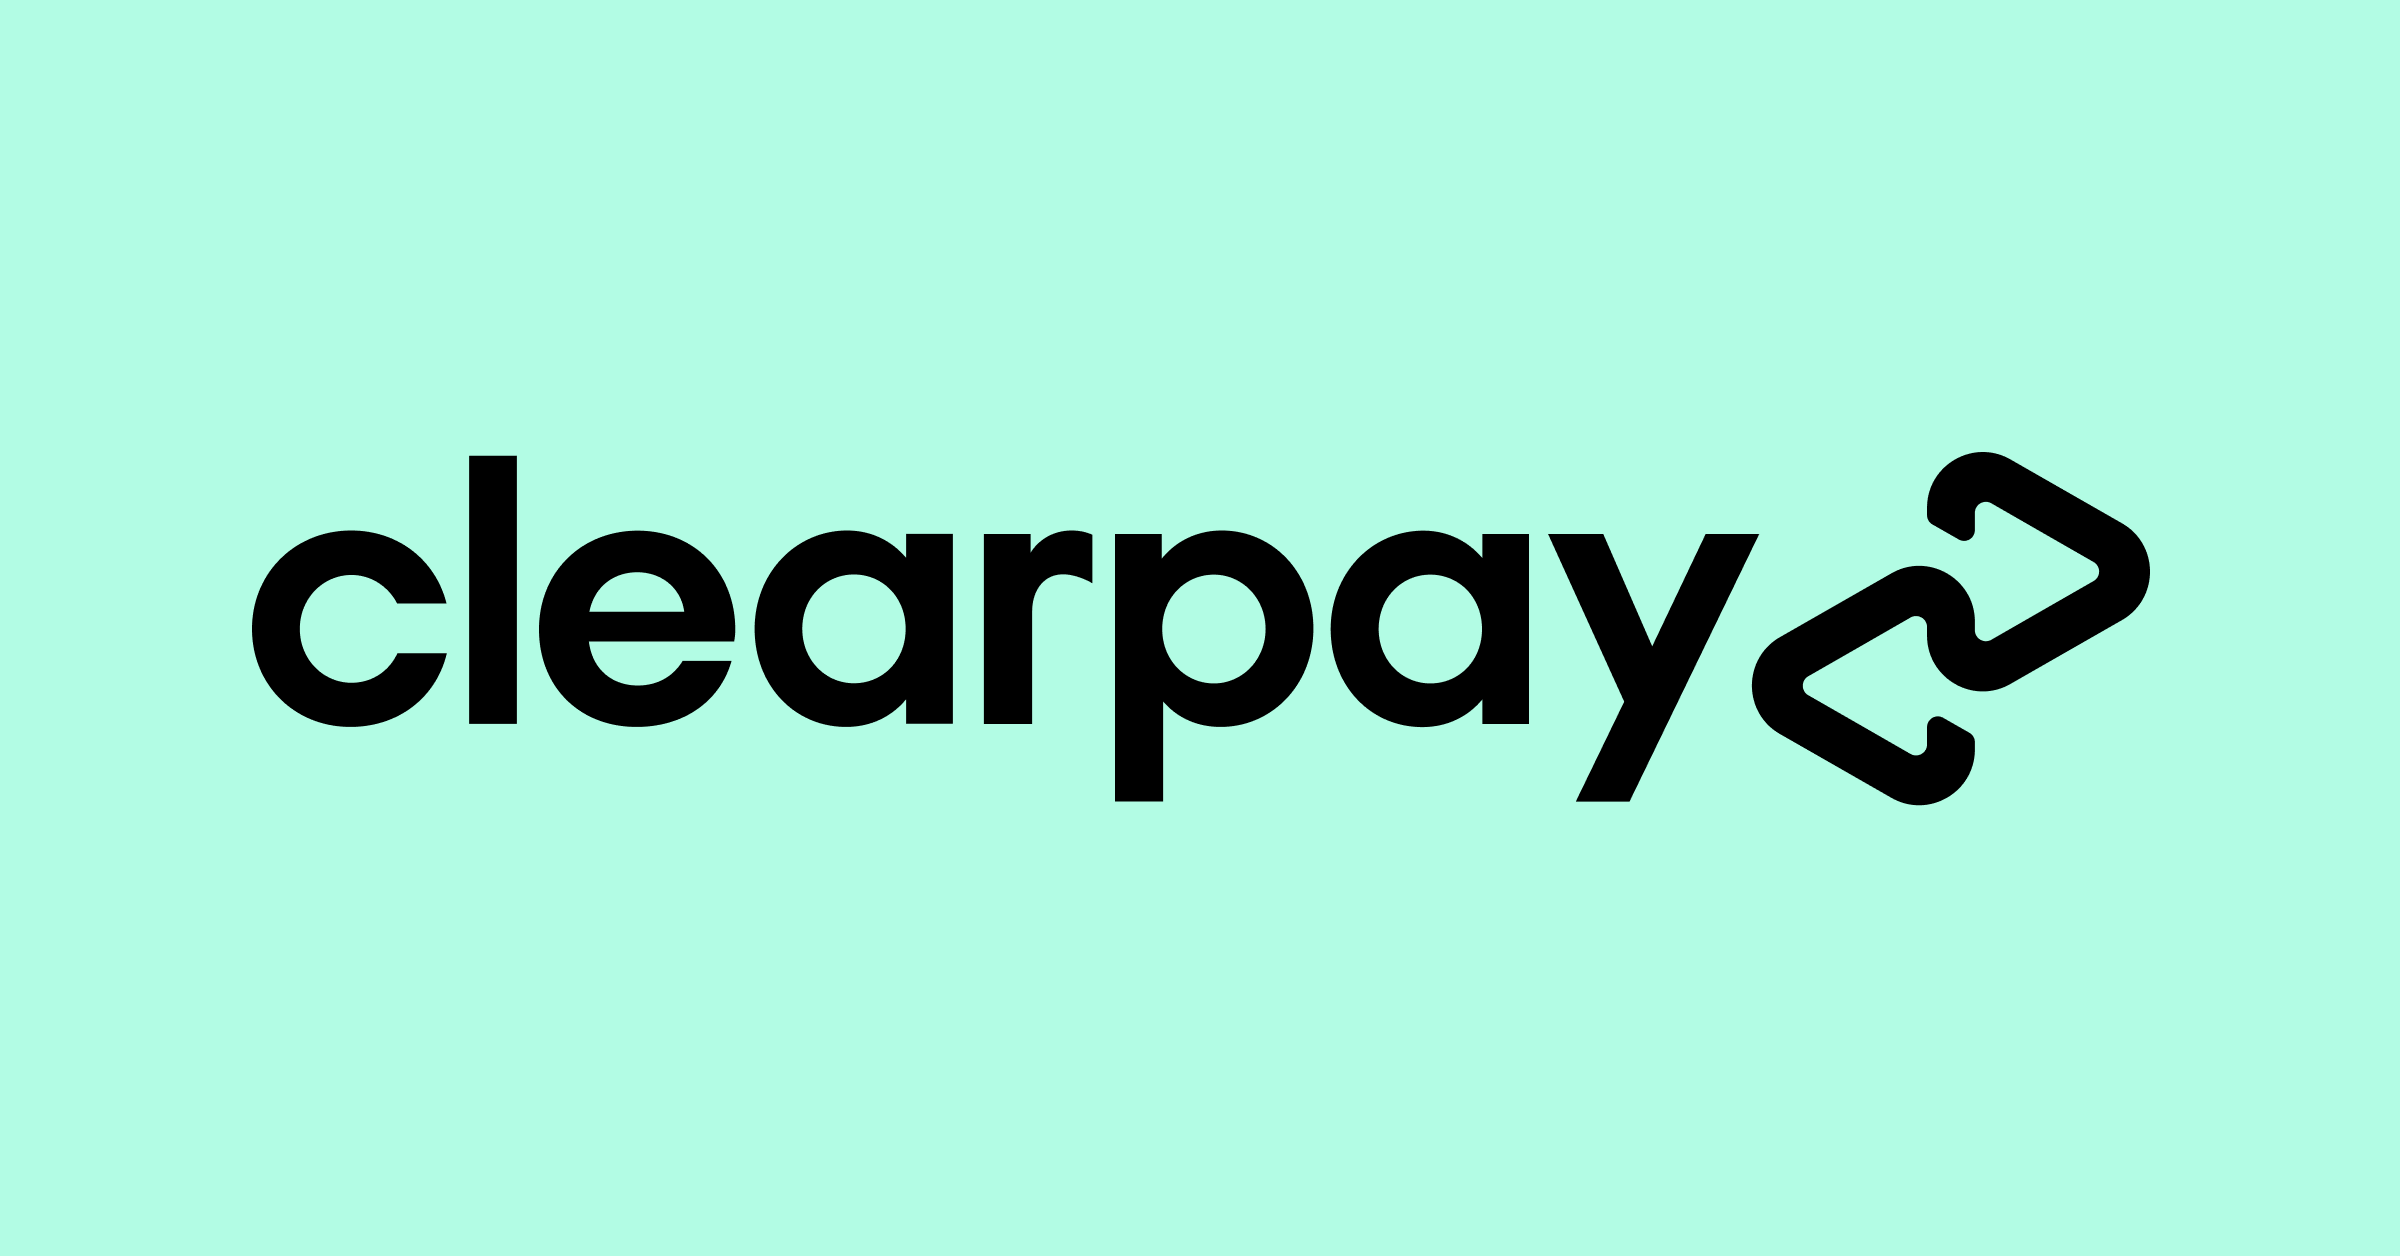 No more Clearpay...